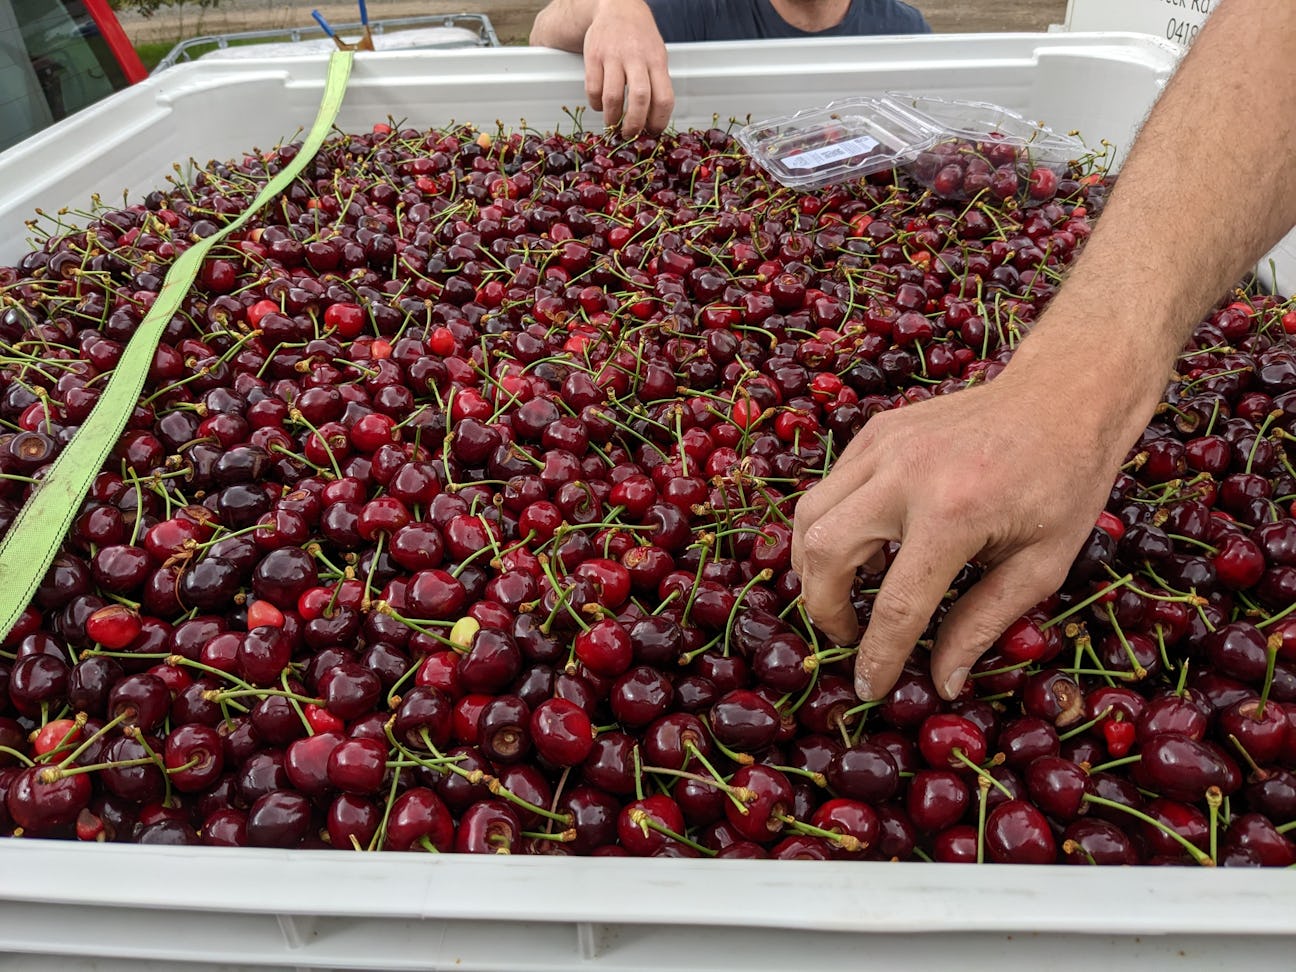 Cherries from Cathedral Cherries. Image source: Sustainability Victoria